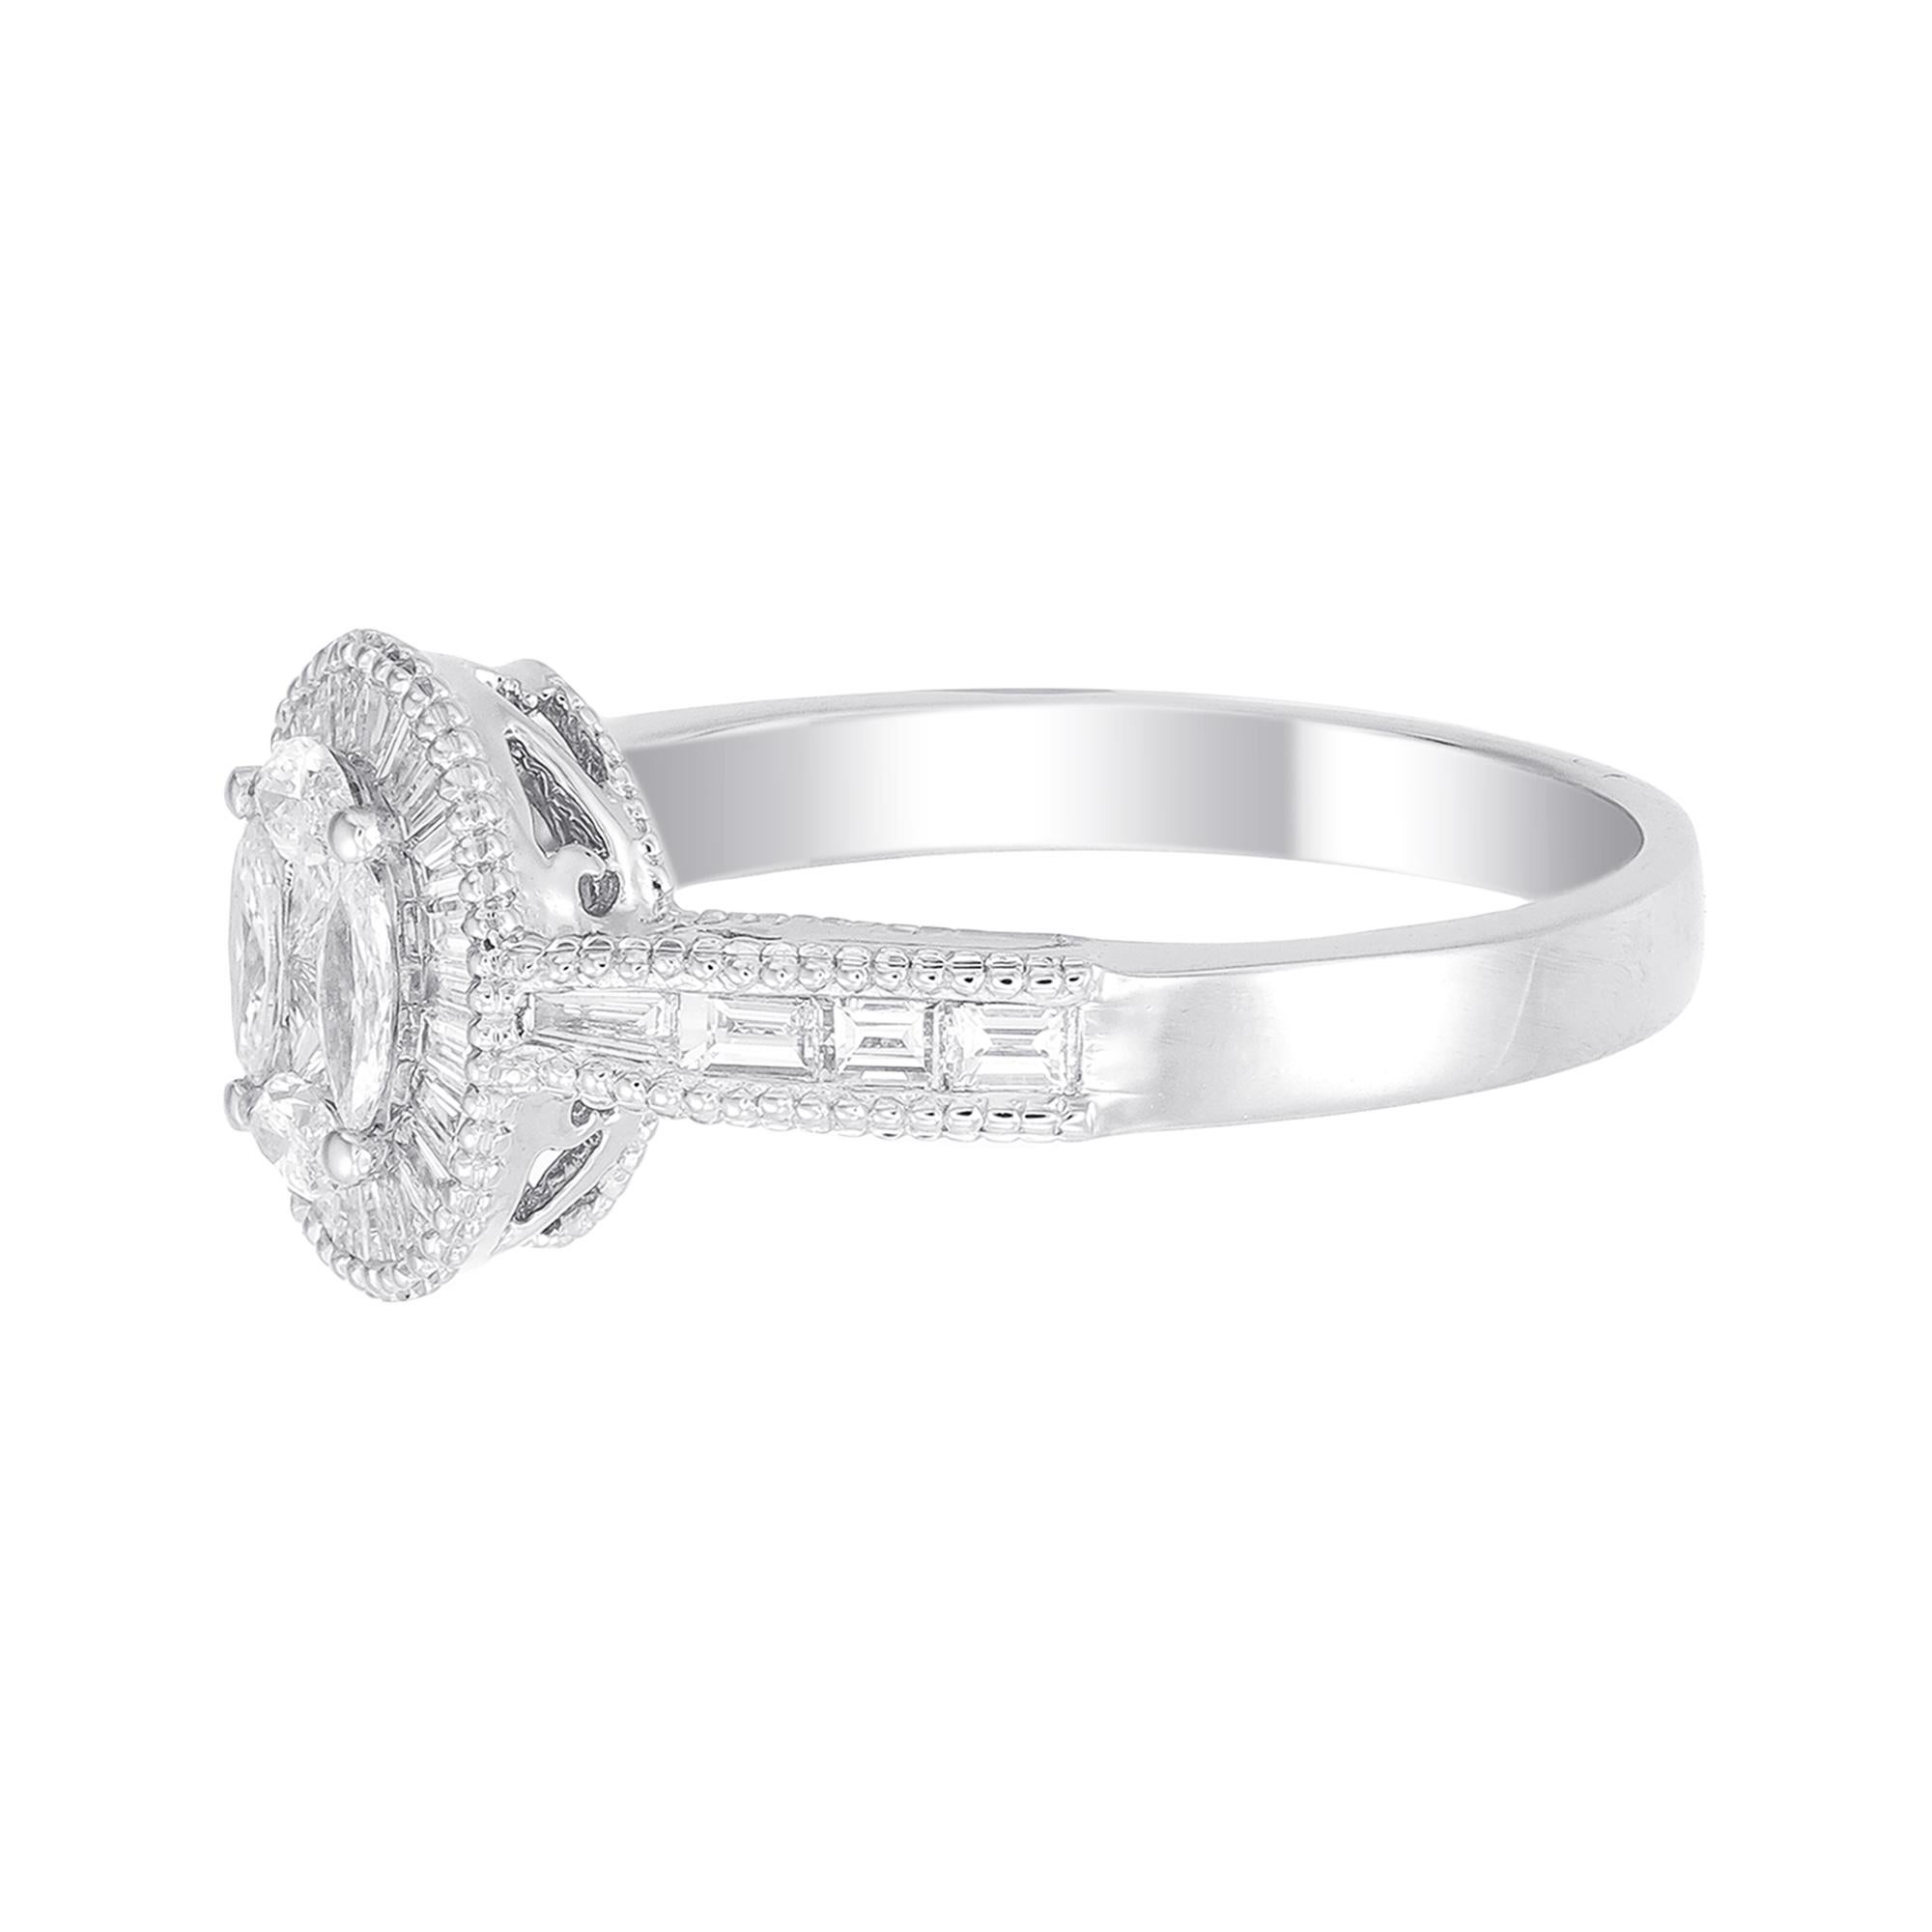 This 18K White Gold cocktail ring features a luscious Oval shape White Diamond Illusion, accentuated by a halo of Baguette Cut diamonds. Combine with glamorous outfits for a show-stopping effect. Each diamond hand-selected by our experts for its